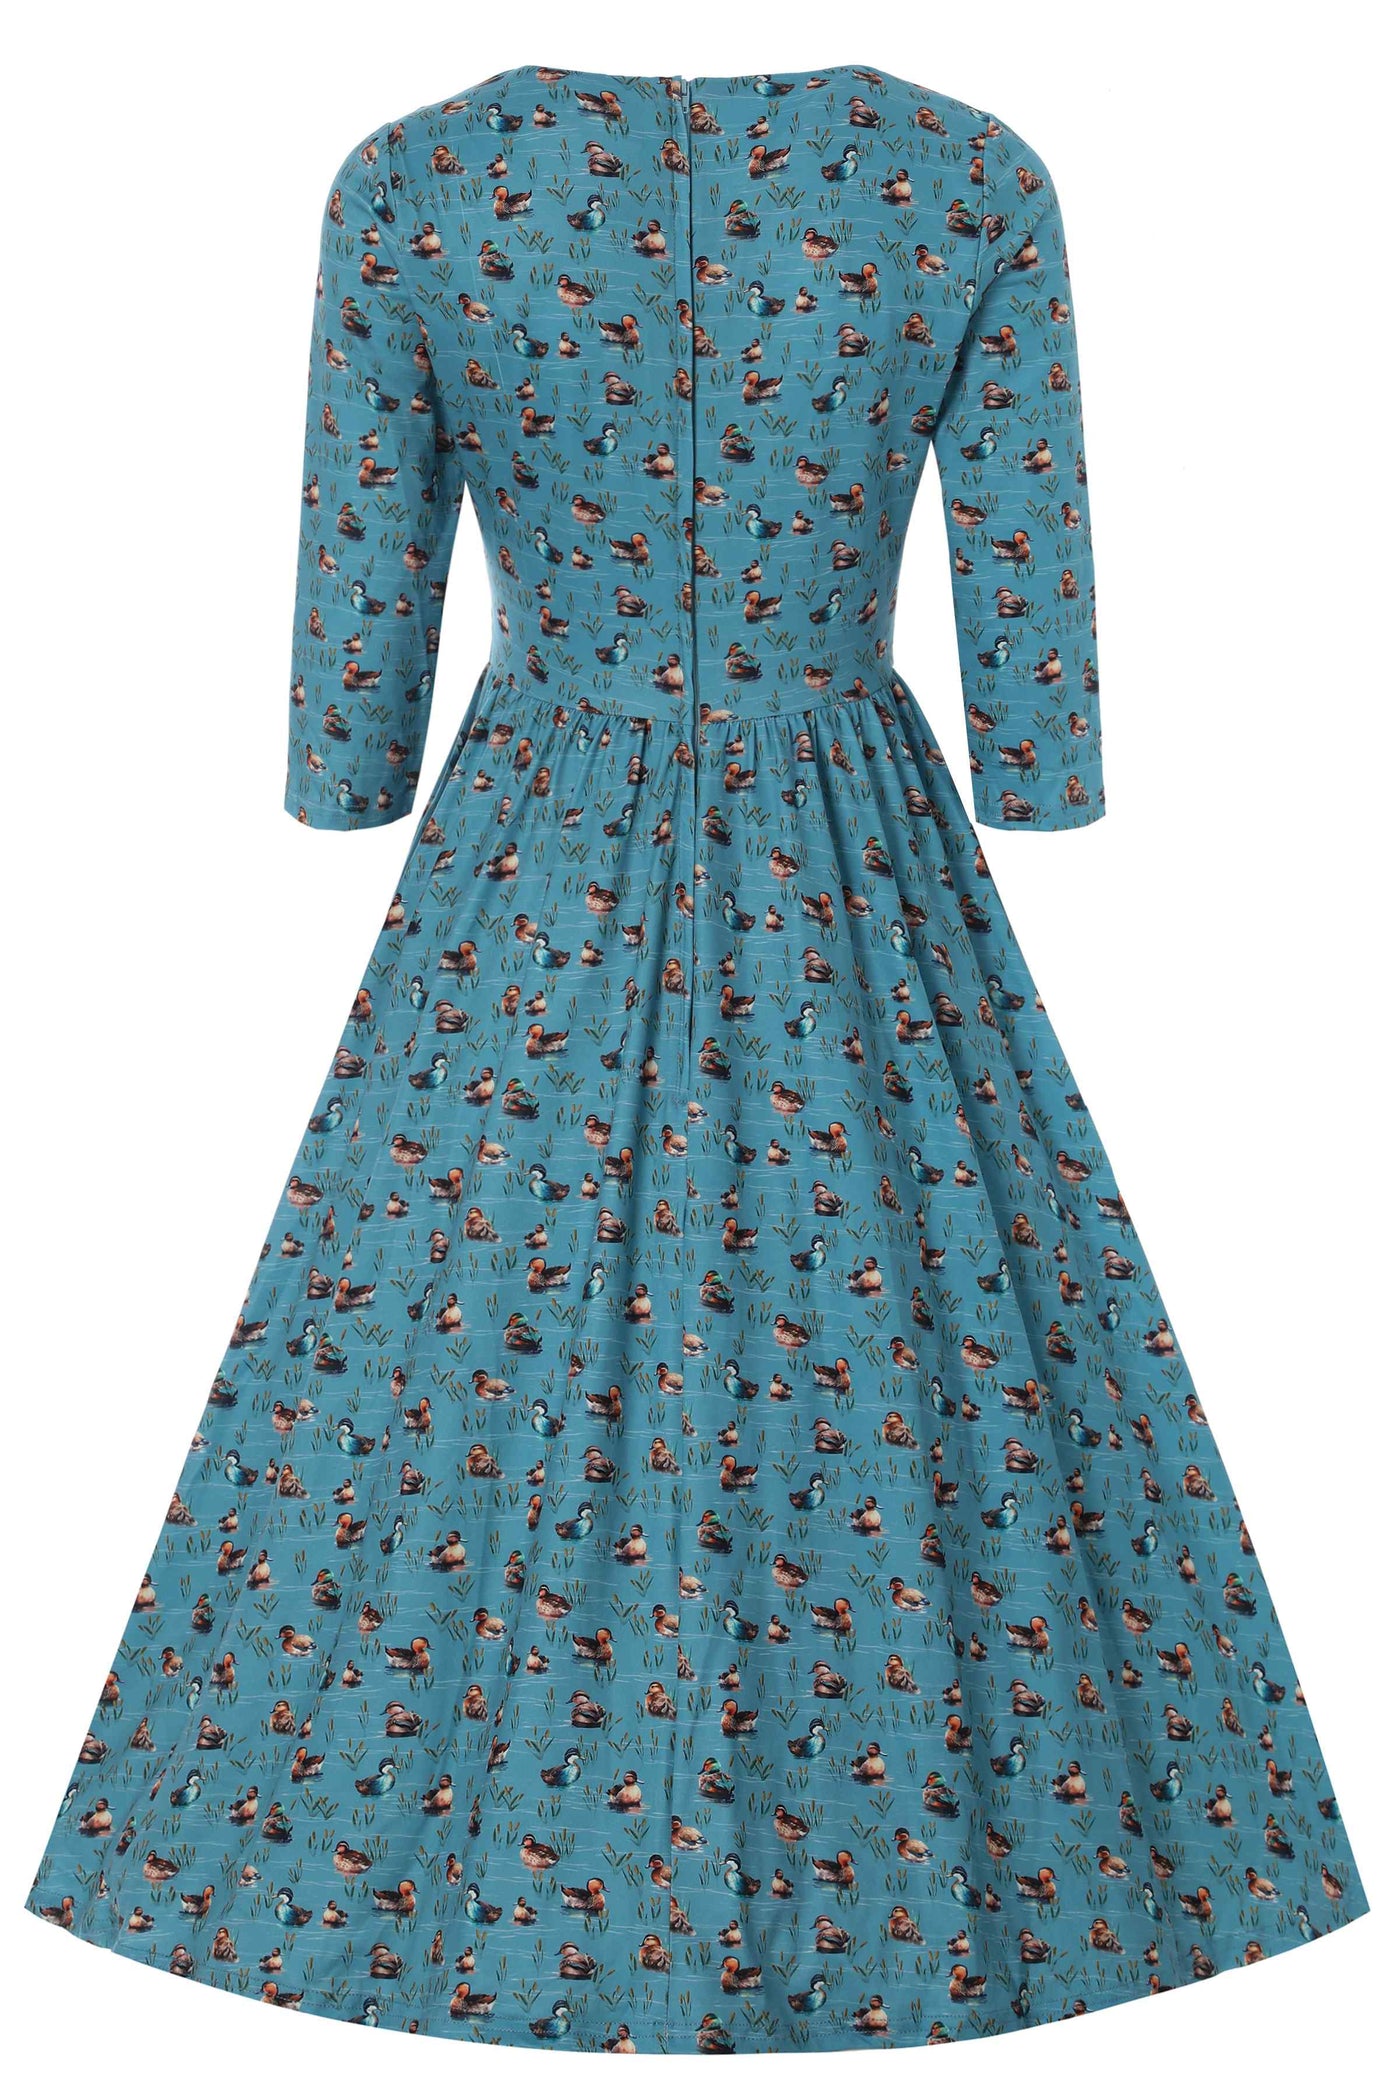 Back View of Duck Print Long Sleeved Swing Dress in Blue